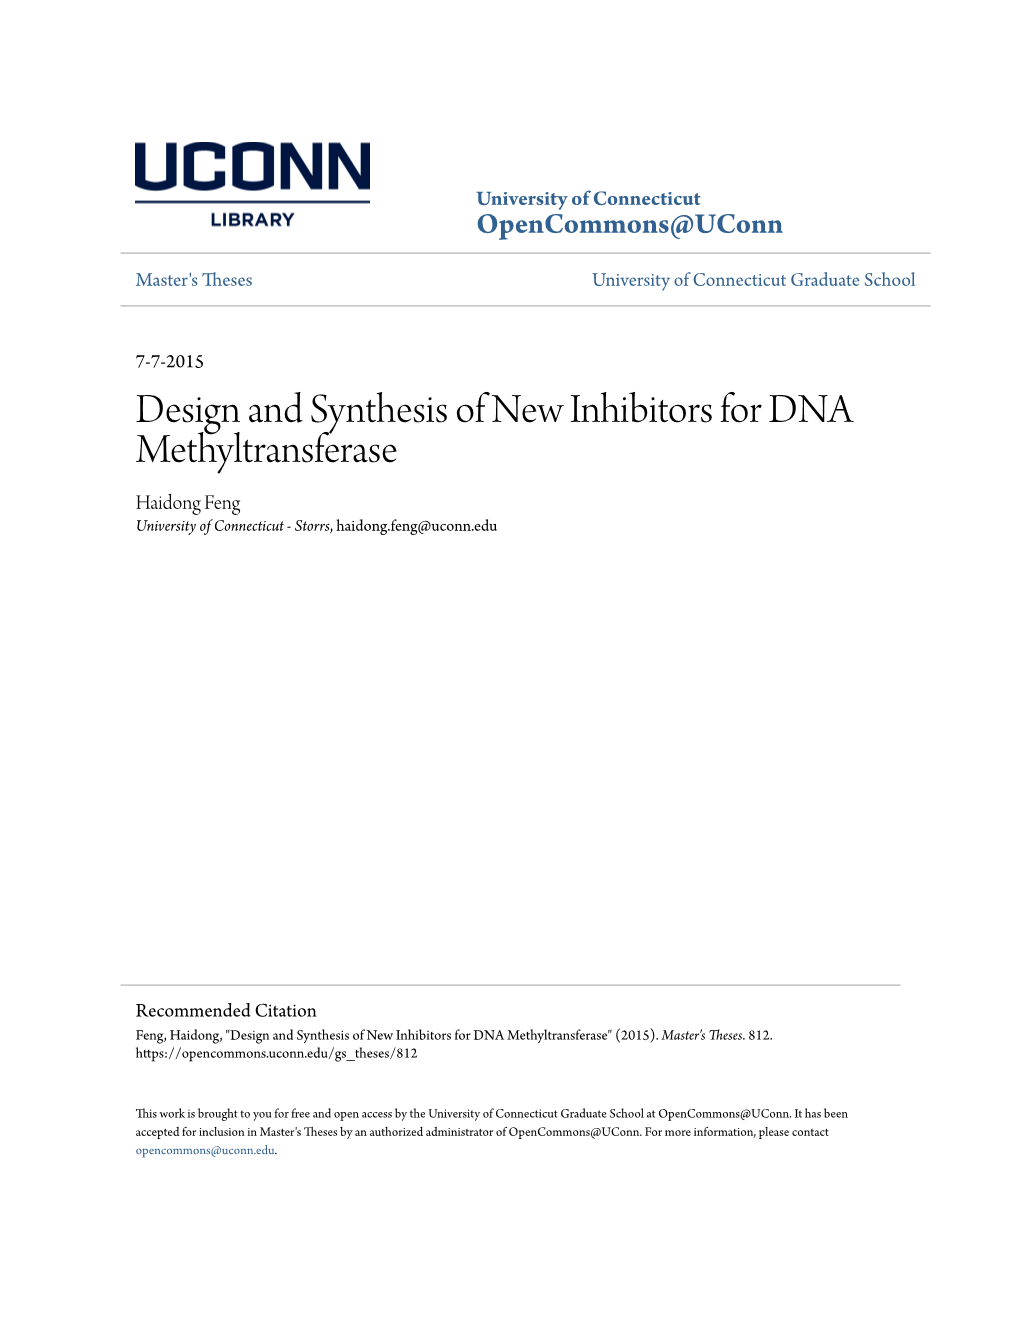 Design and Synthesis of New Inhibitors for DNA Methyltransferase Haidong Feng University of Connecticut - Storrs, Haidong.Feng@Uconn.Edu